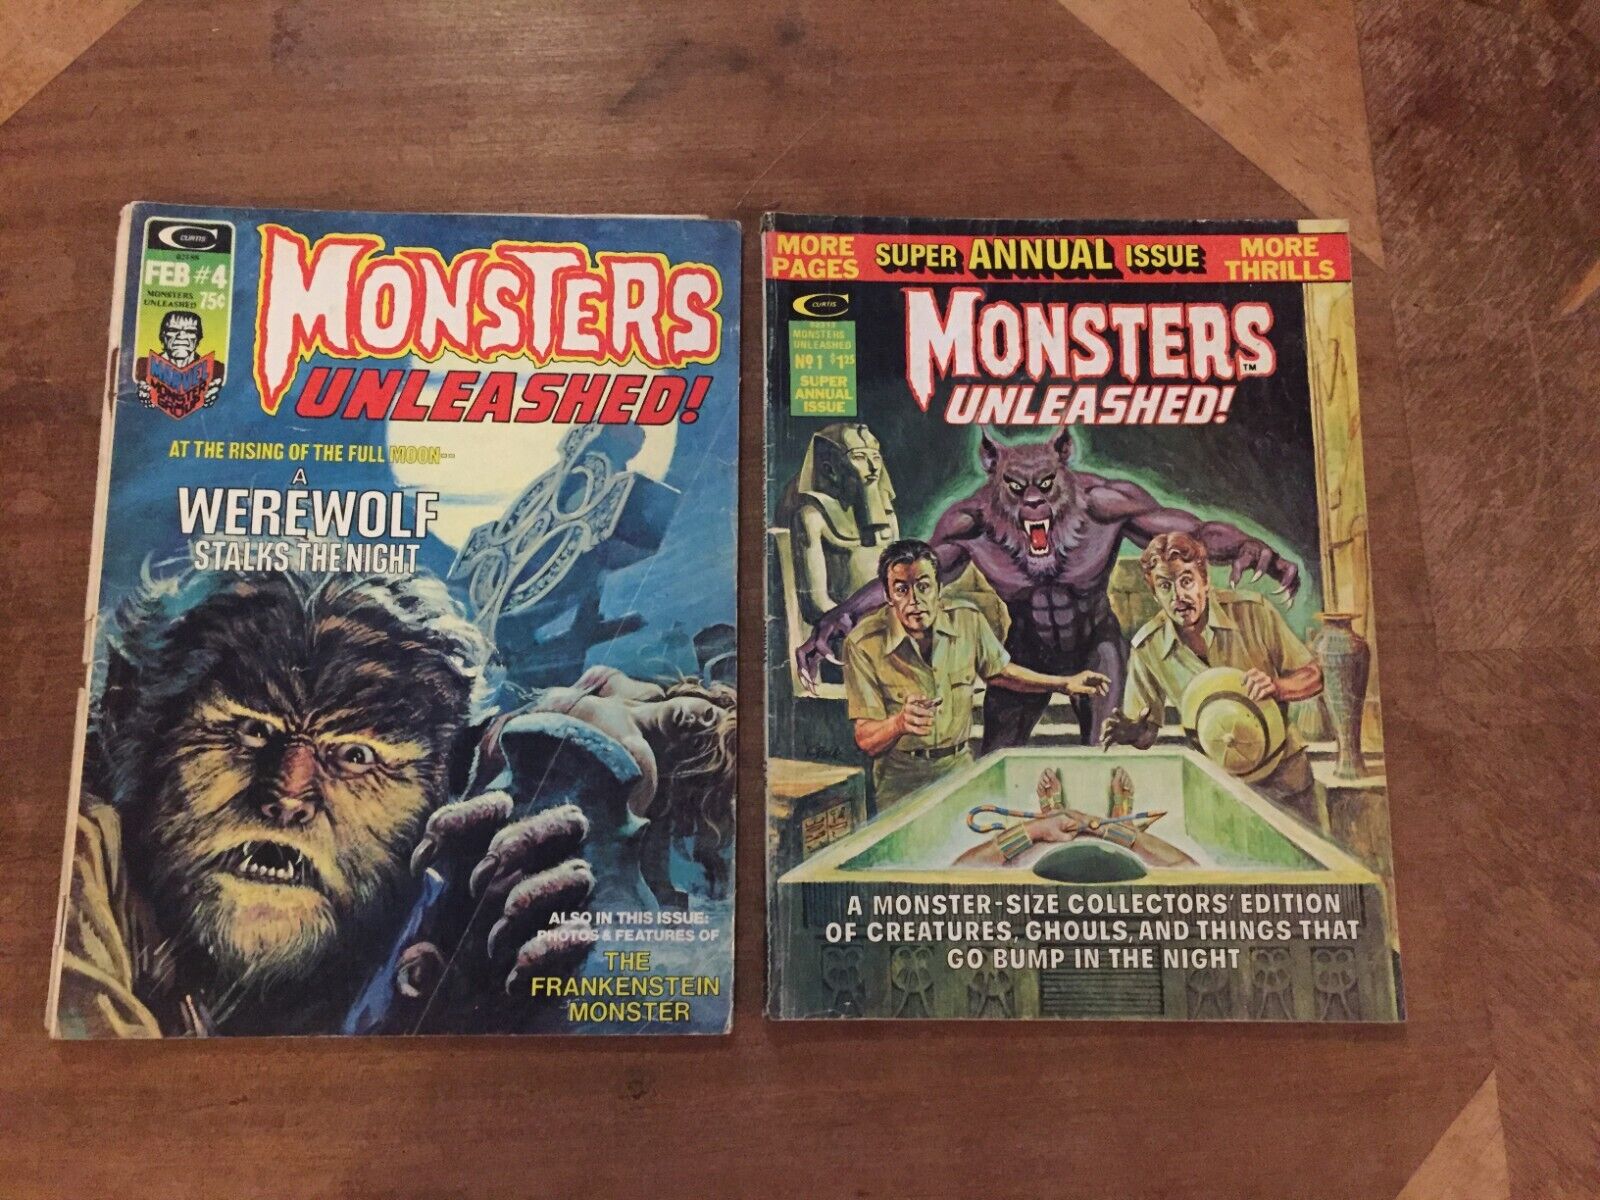 MONSTERS UNLEASHED- #4 FEB 1974 #1 ANNUAL EDITION SUMMER 1975- CURTIS COMICS